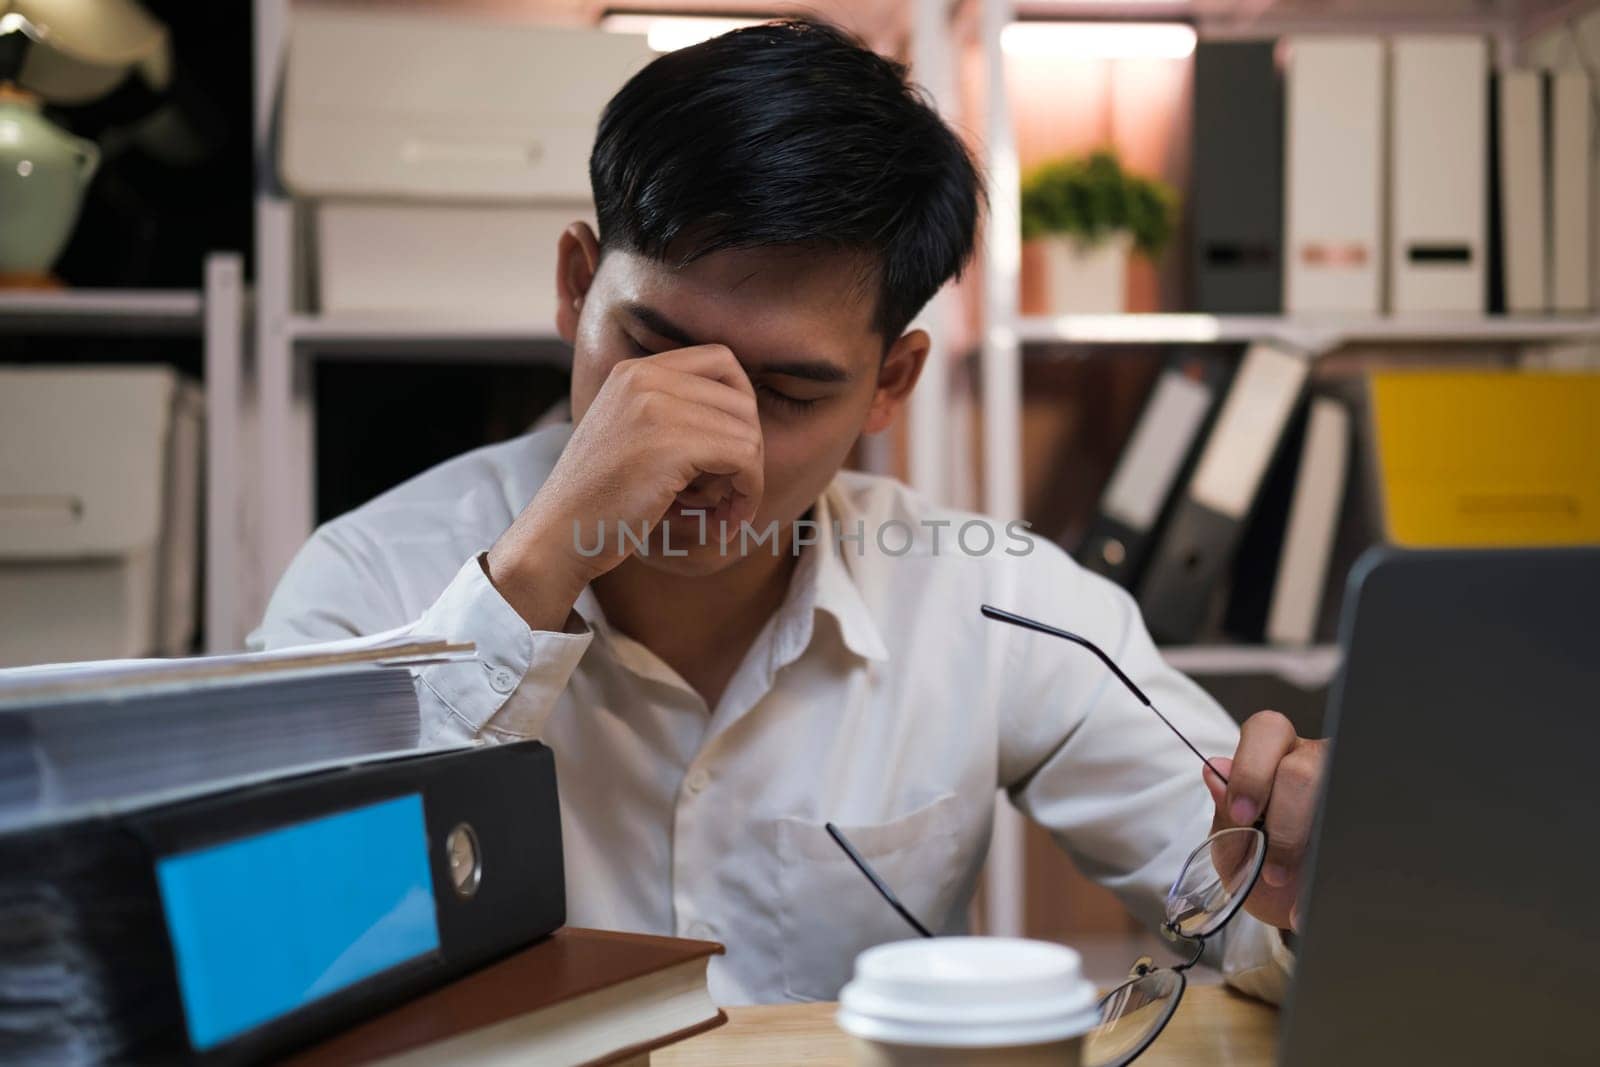 Asian young tired staff businessman using desktop computer having overwork project overnight in office, exhausted unhappy businessman feeling sleepy after after working hard overtime at night.